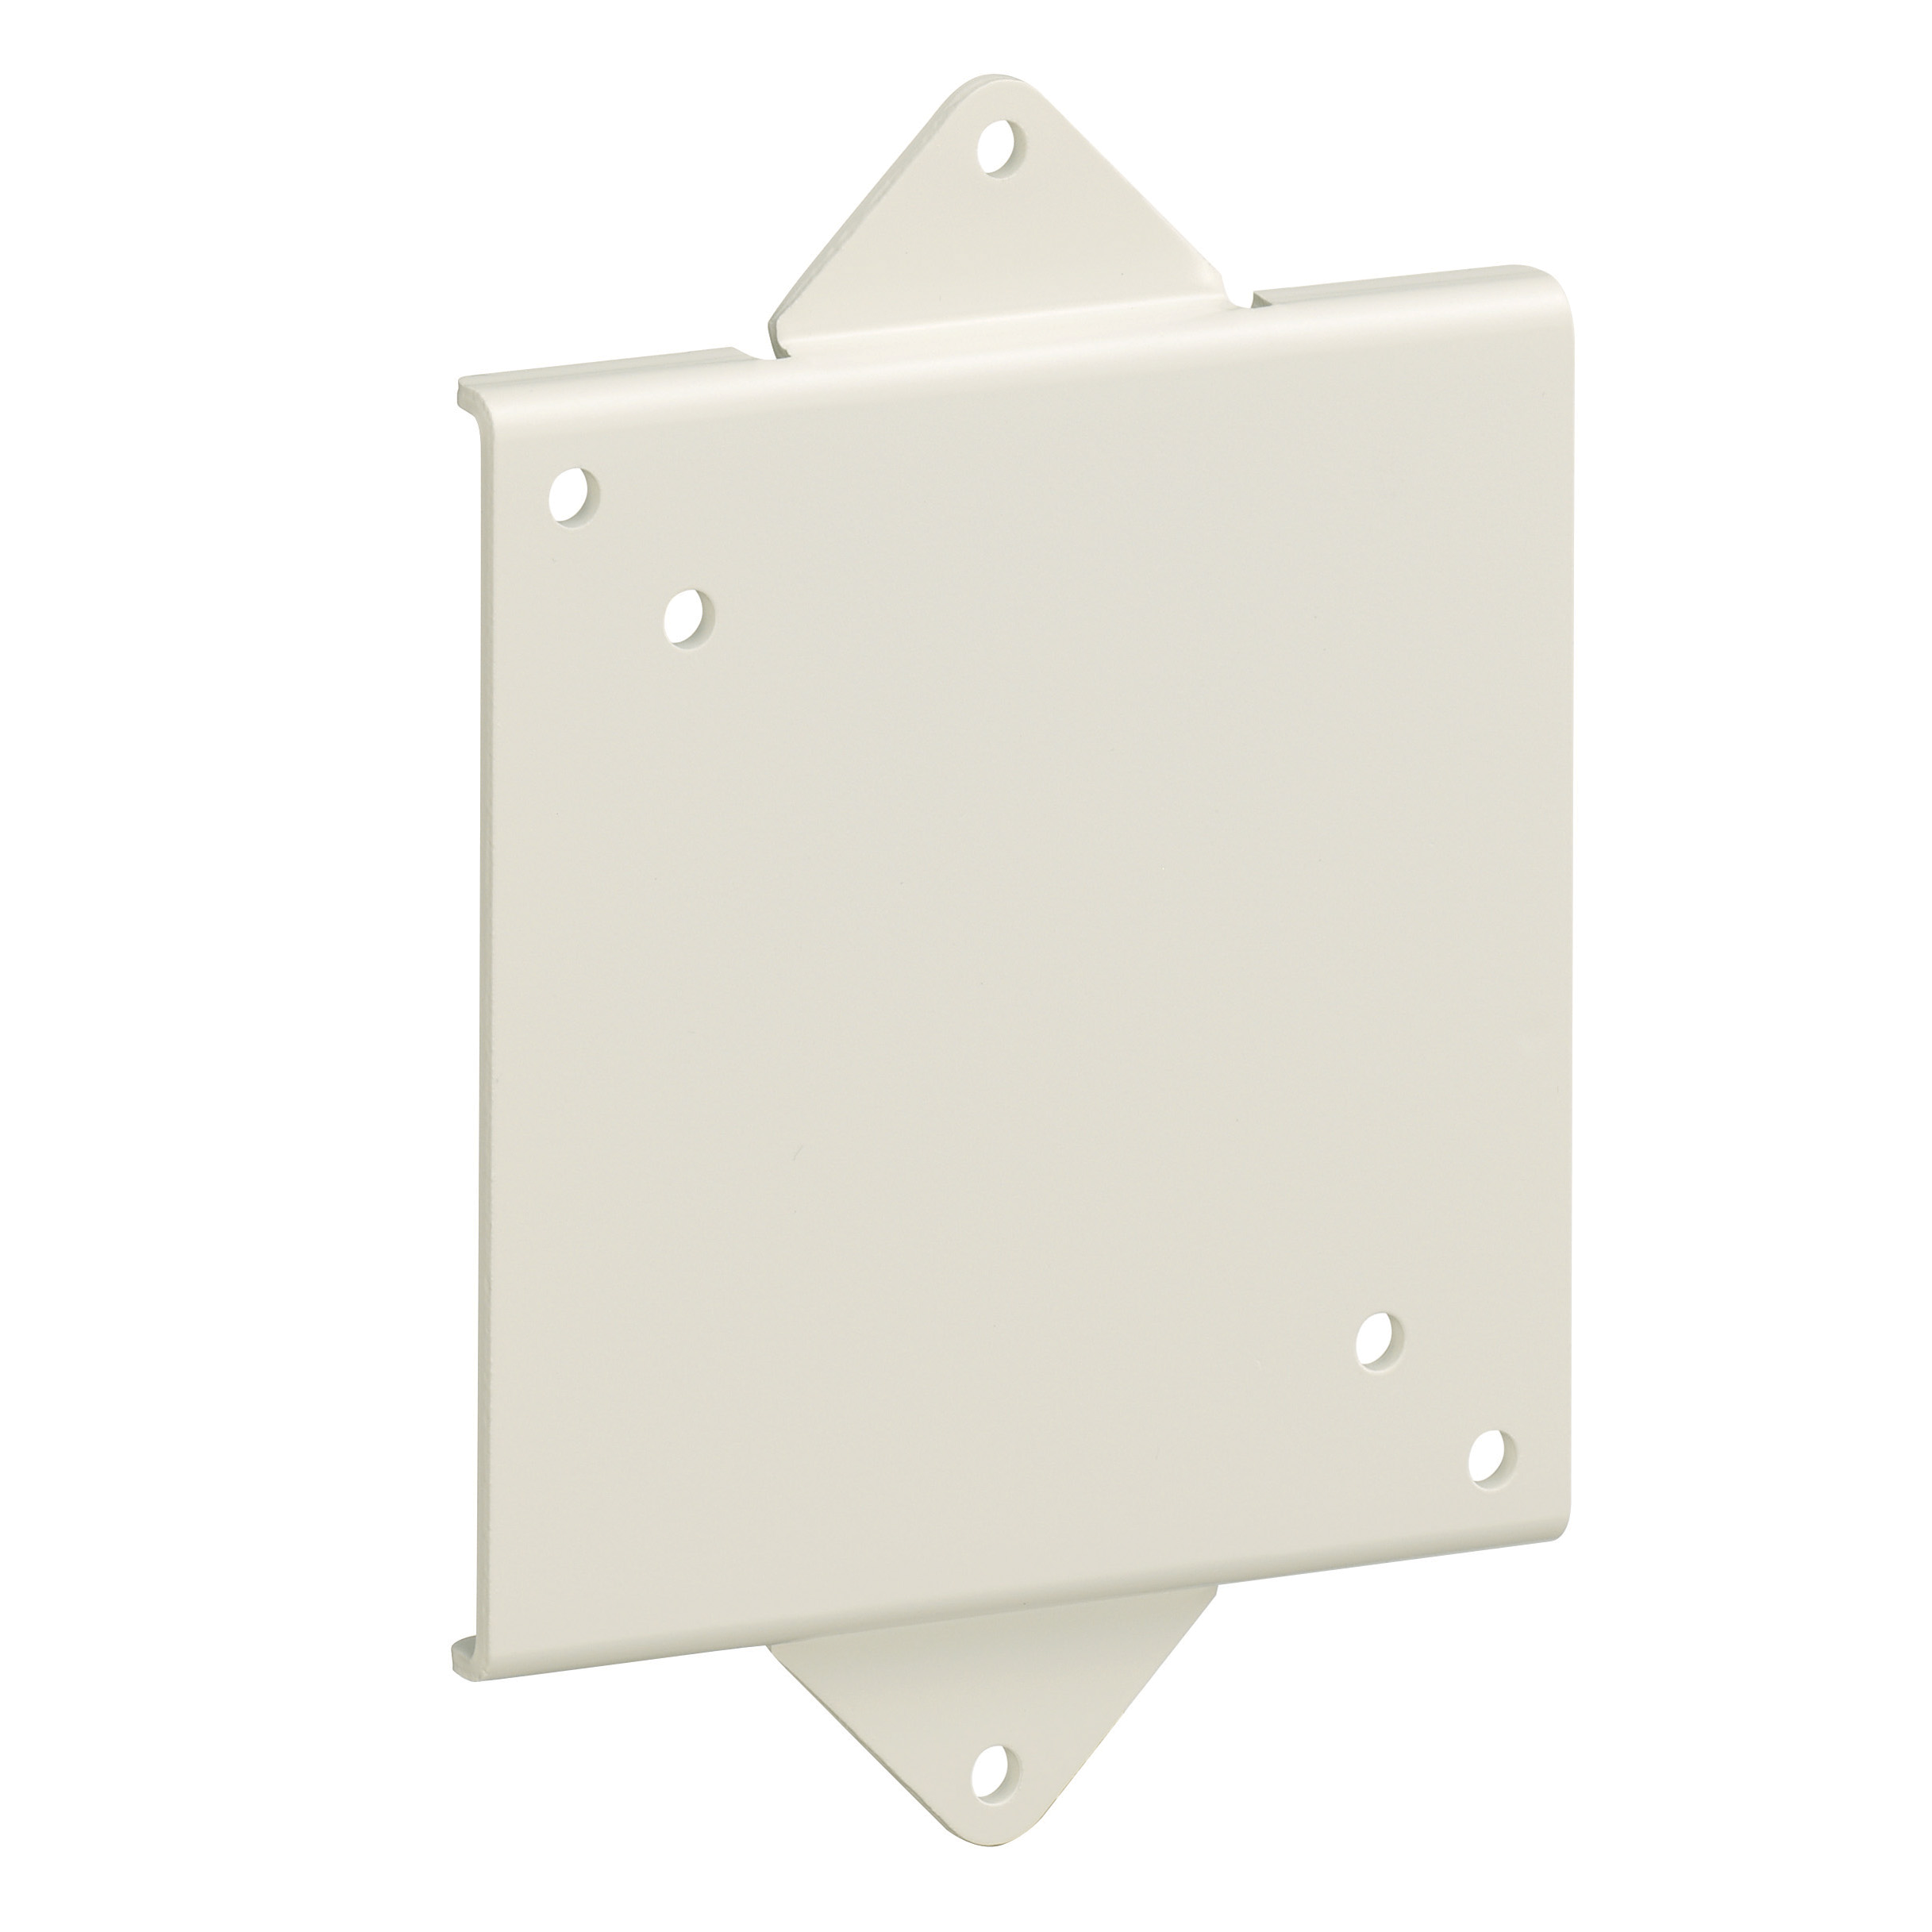 Wall mounting plate for editable alarms, Harmony XVS, mounting 96 mm or 72 mm DIN rail